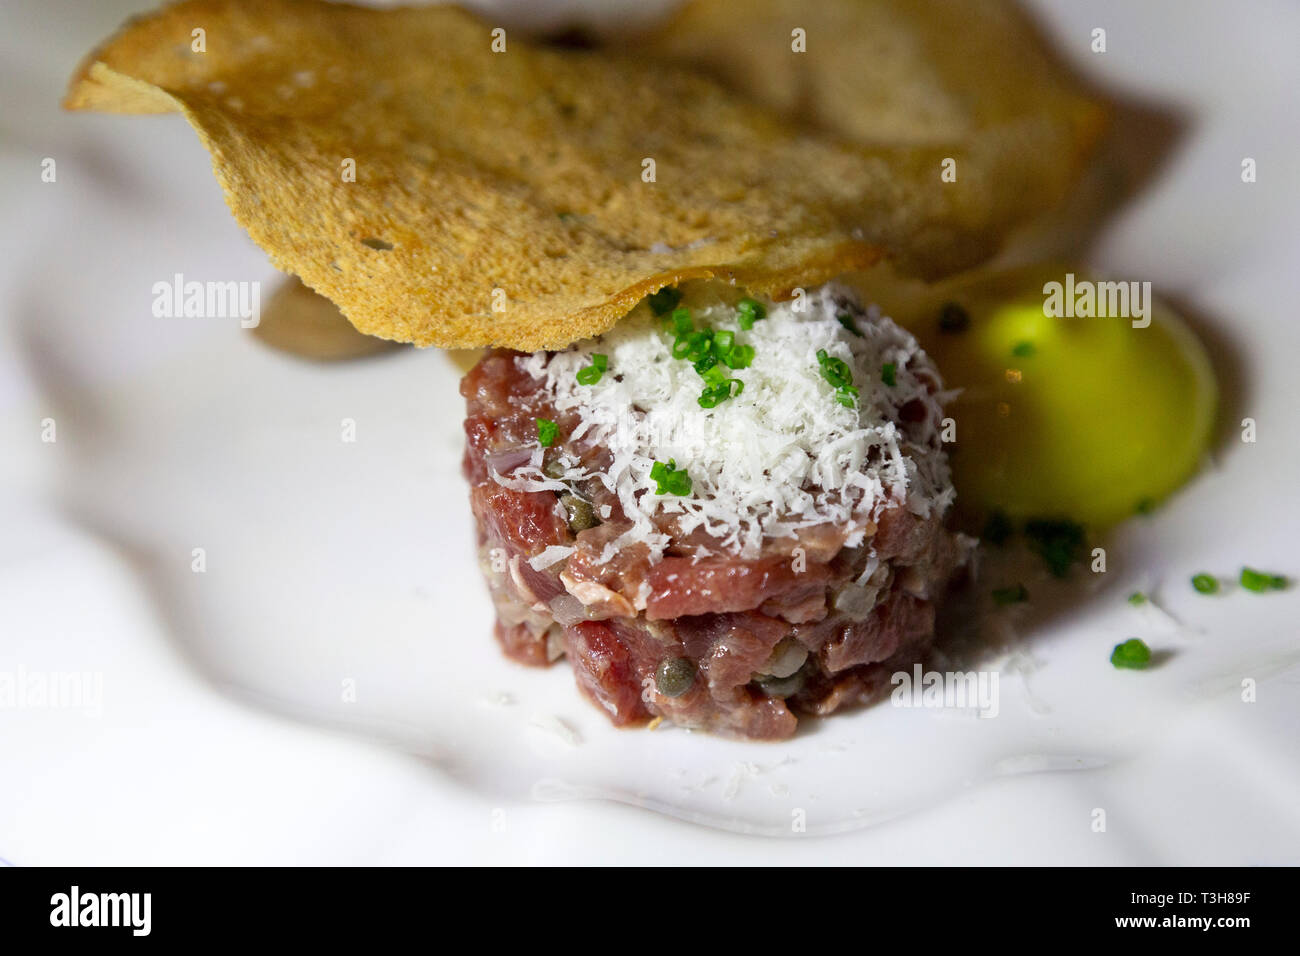 Steak tartare served with a thin slice of crisp bread. The raw meat is topped with grated cheese. Stock Photo